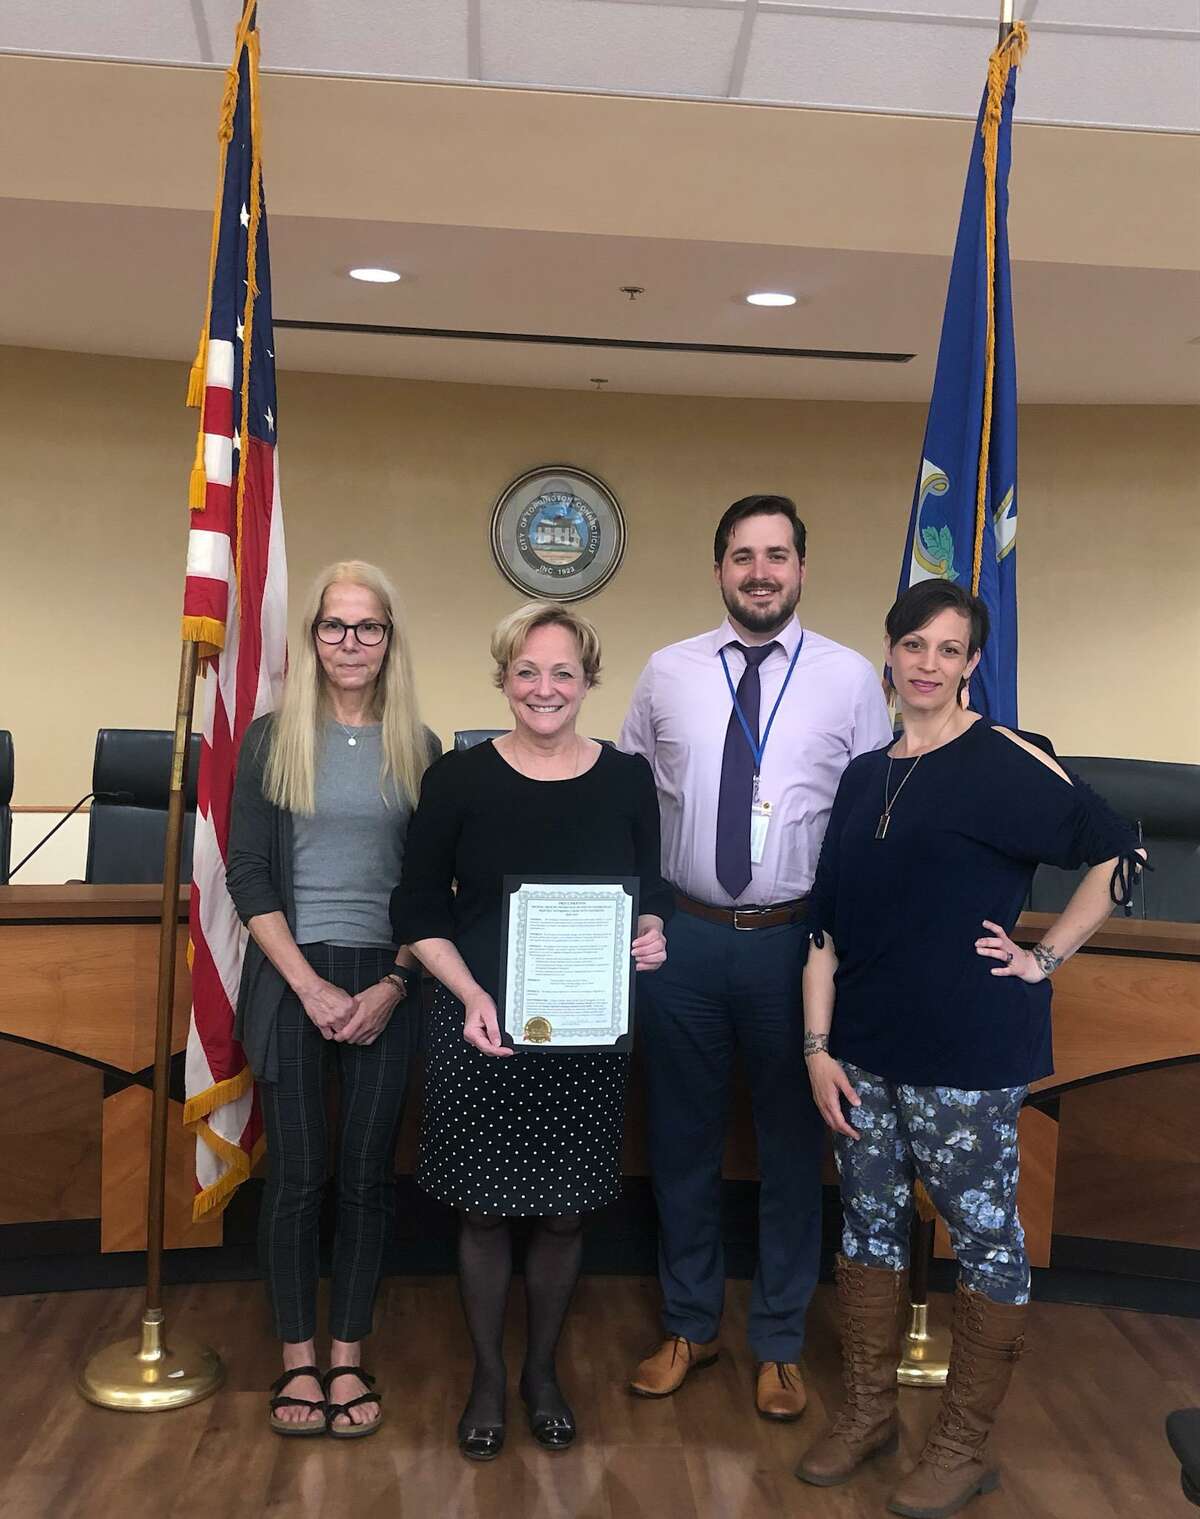 In honor of Mental Health Awareness month, Mayor Carbone recognized The Torrington Awareness and Prevention Partnership coalition with a proclamation. Accepting the proclamation were, from left, Catharina Ohm, Executive Director of Torrington Youth Service Bureau; Partner, Andrew Lyon, TAPP Coalition coordinator; and Judy Kobylarz-Dillard, TAPP Coalition vice chairperson.